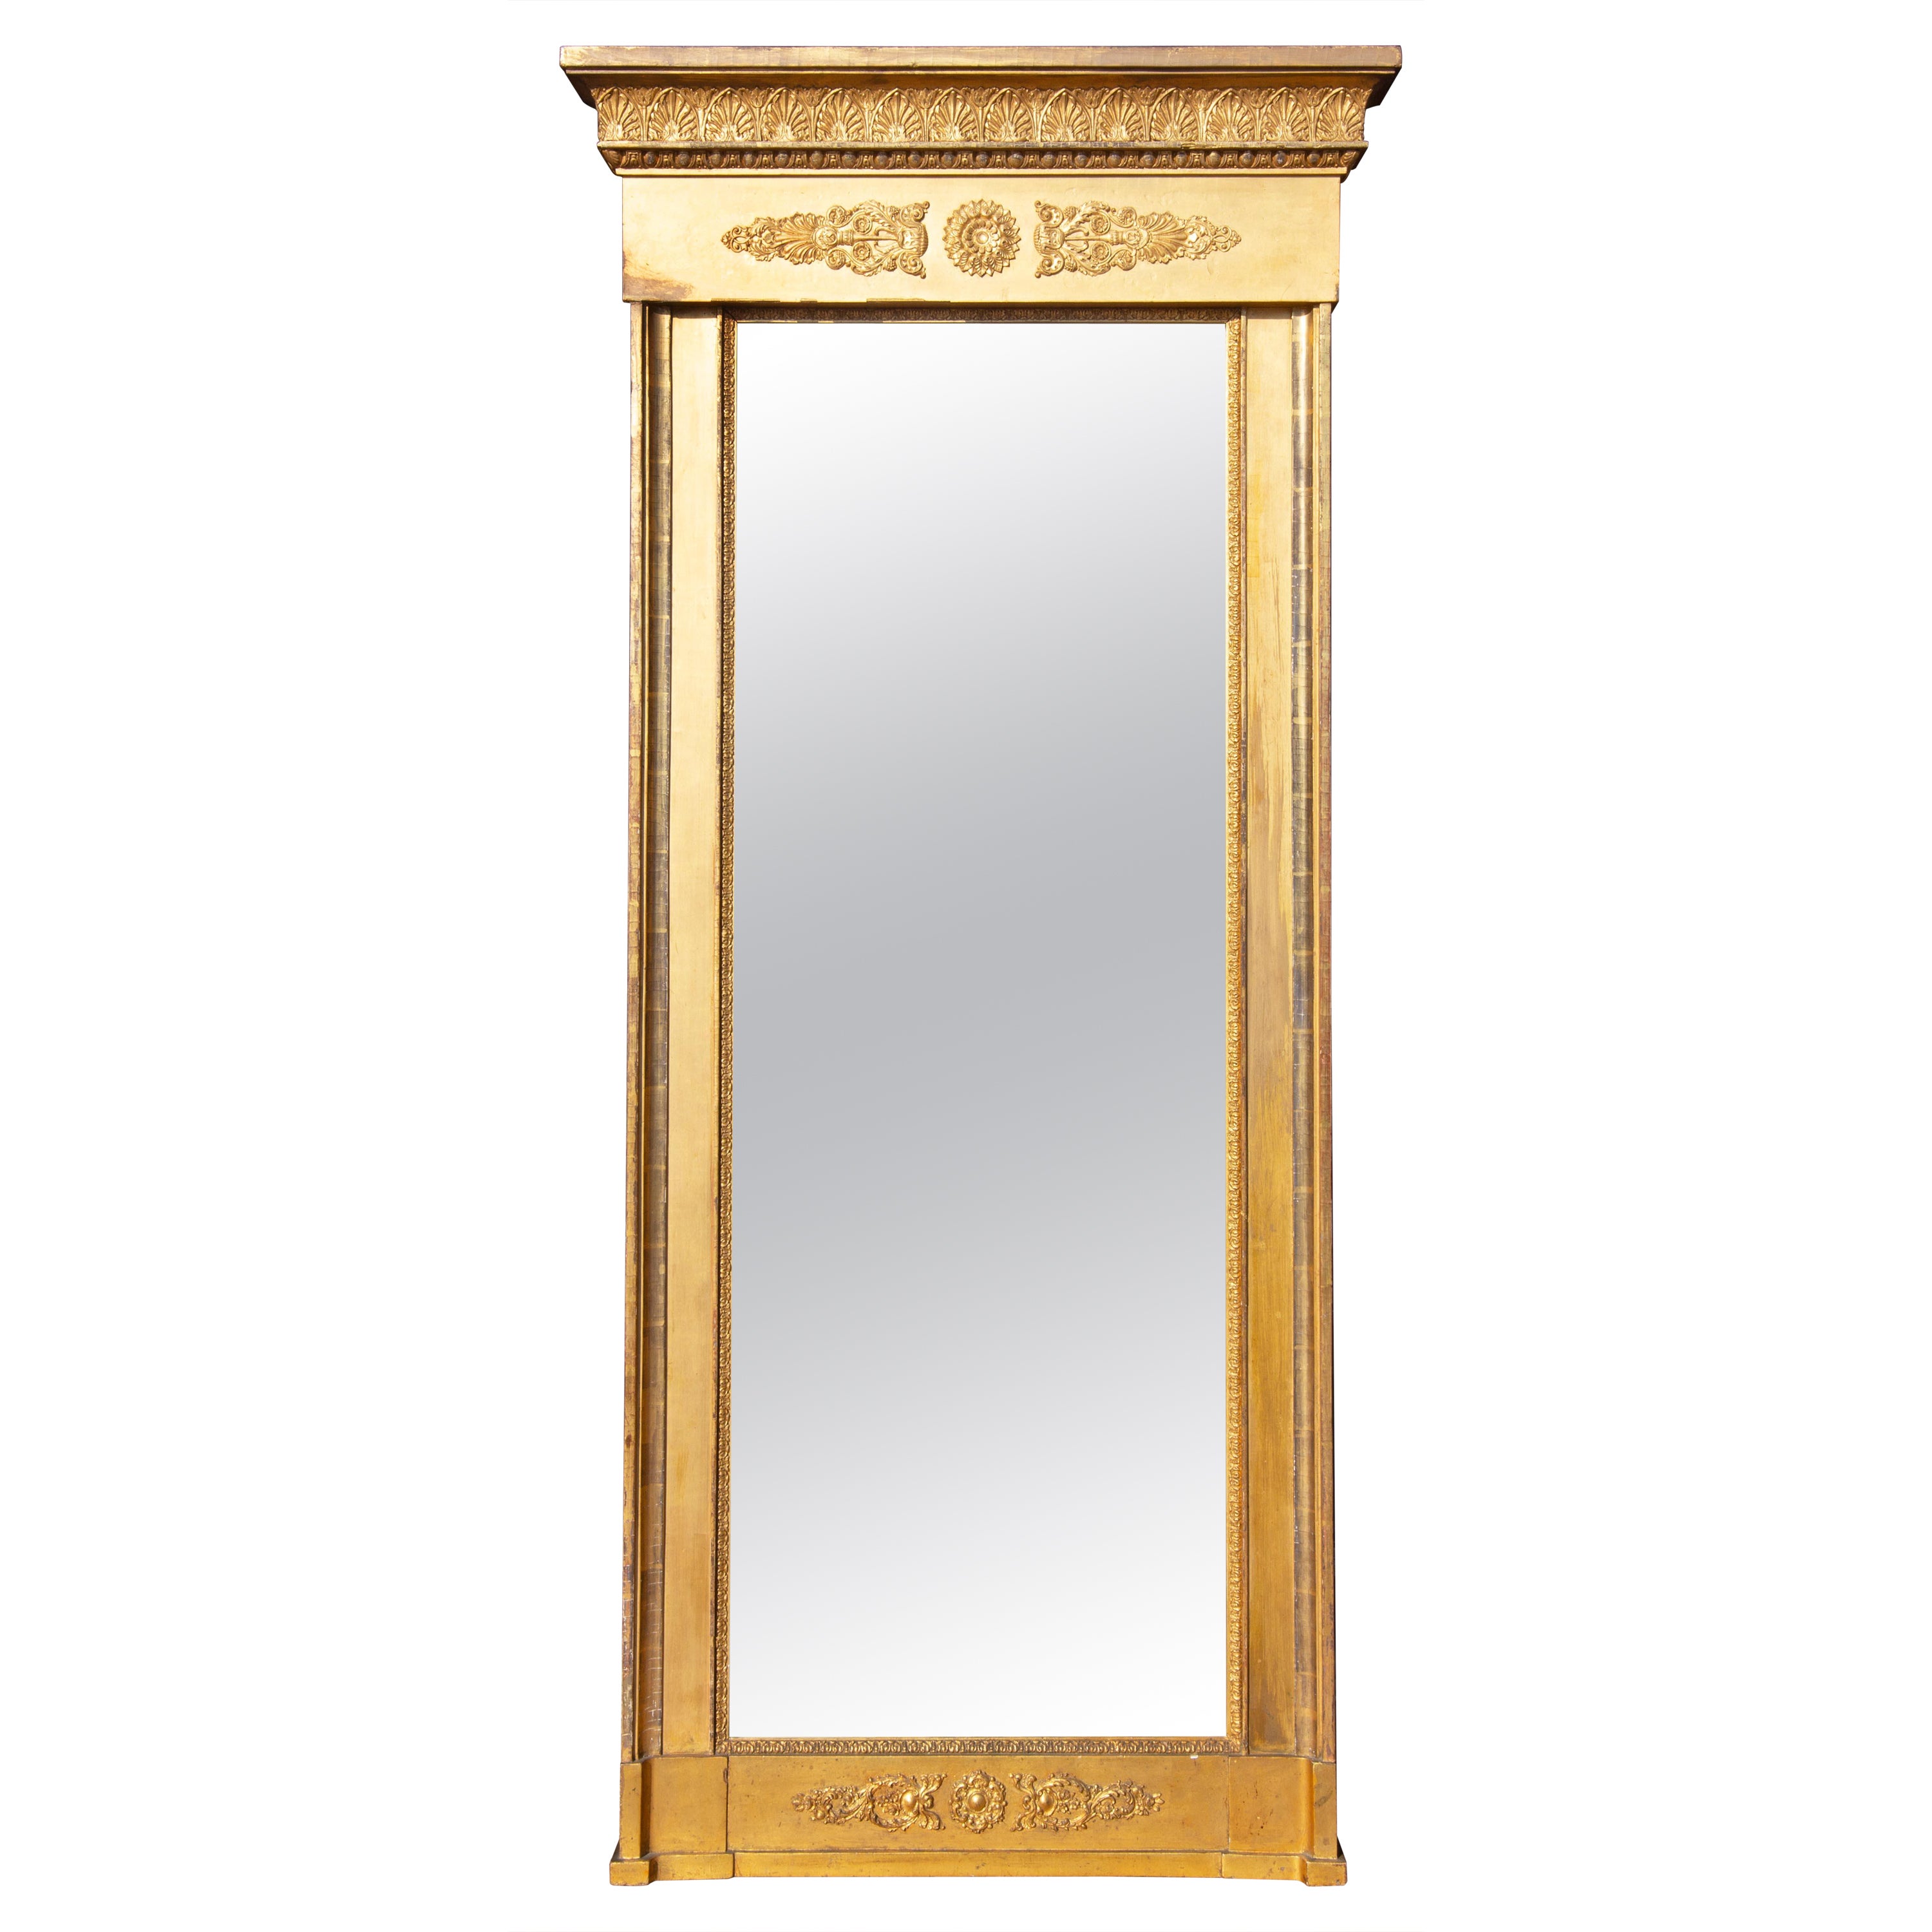 French Neoclassical Giltwood and Gilt-Gesso Pier Mirror, Circa 1820 For Sale